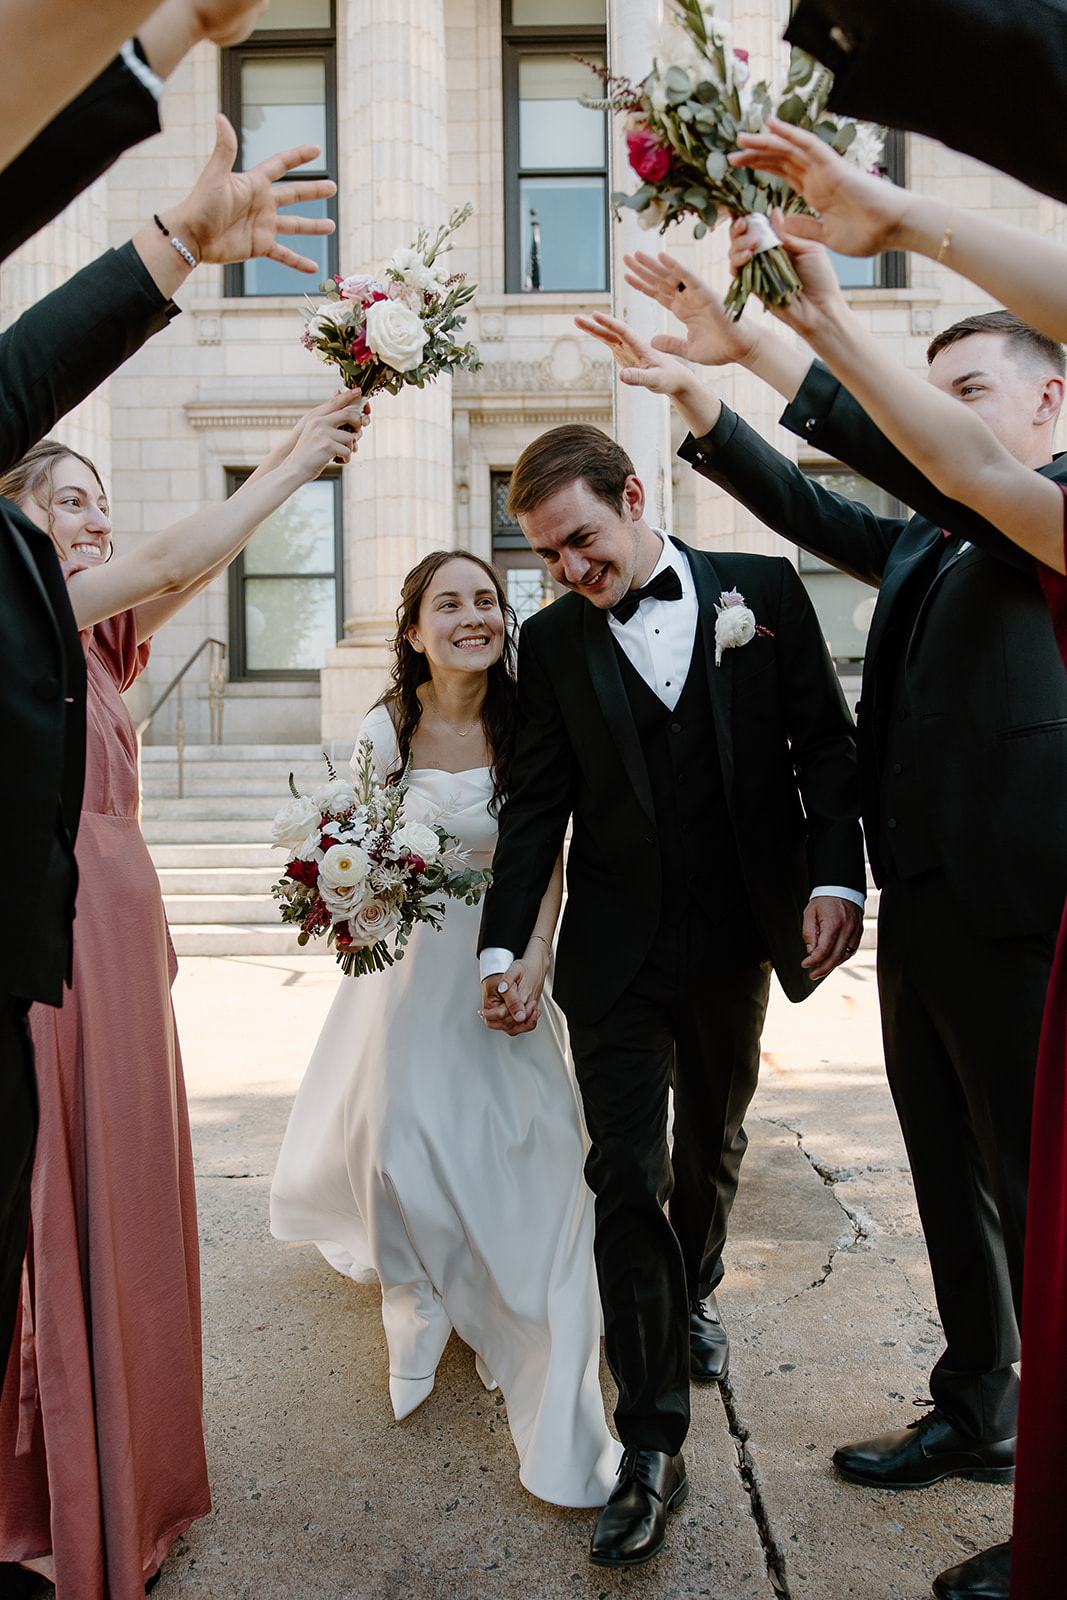 Courthouse bridal party photos near The Graham Mill in North Carolina by Raleigh Wedding Photographers and Videographers